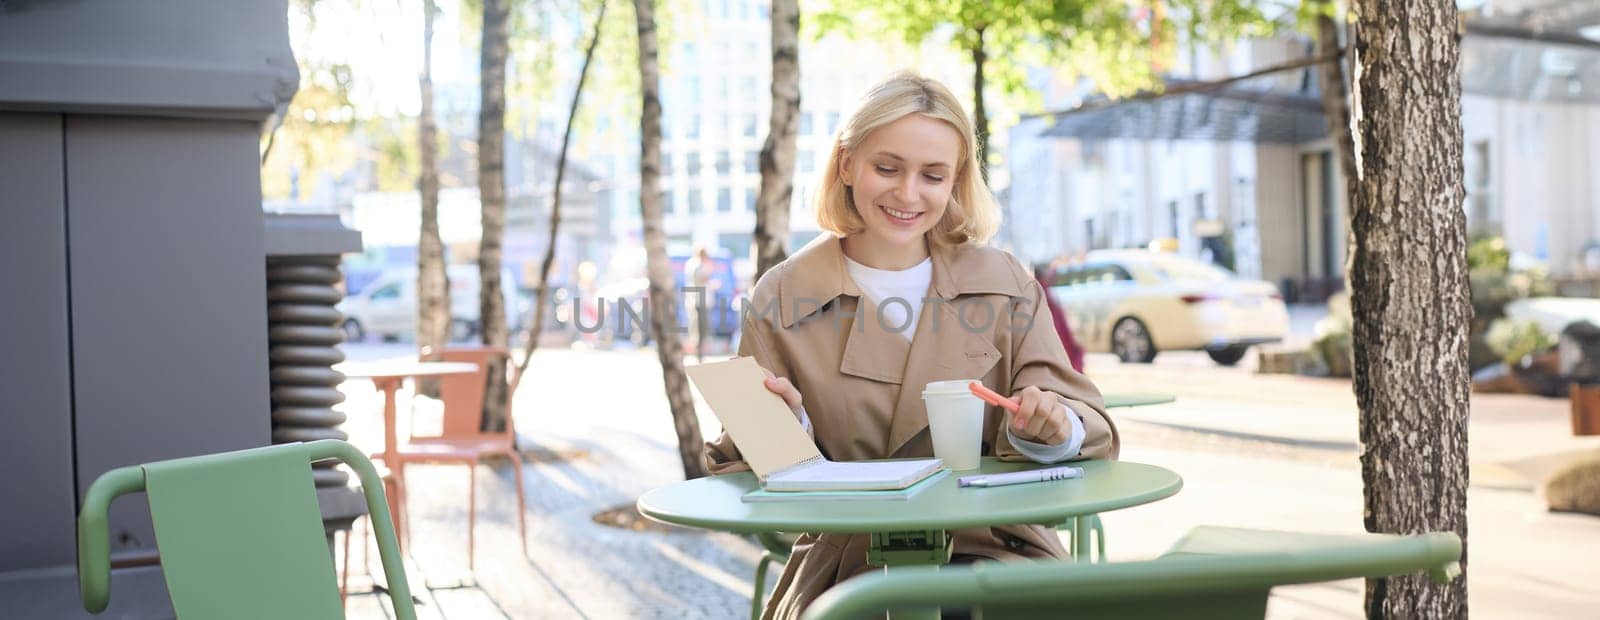 Portrait of stylish modern woman, sitting in an outdoor cafe, smiling and drinking coffee from takeaway cup, wearing trench coat.